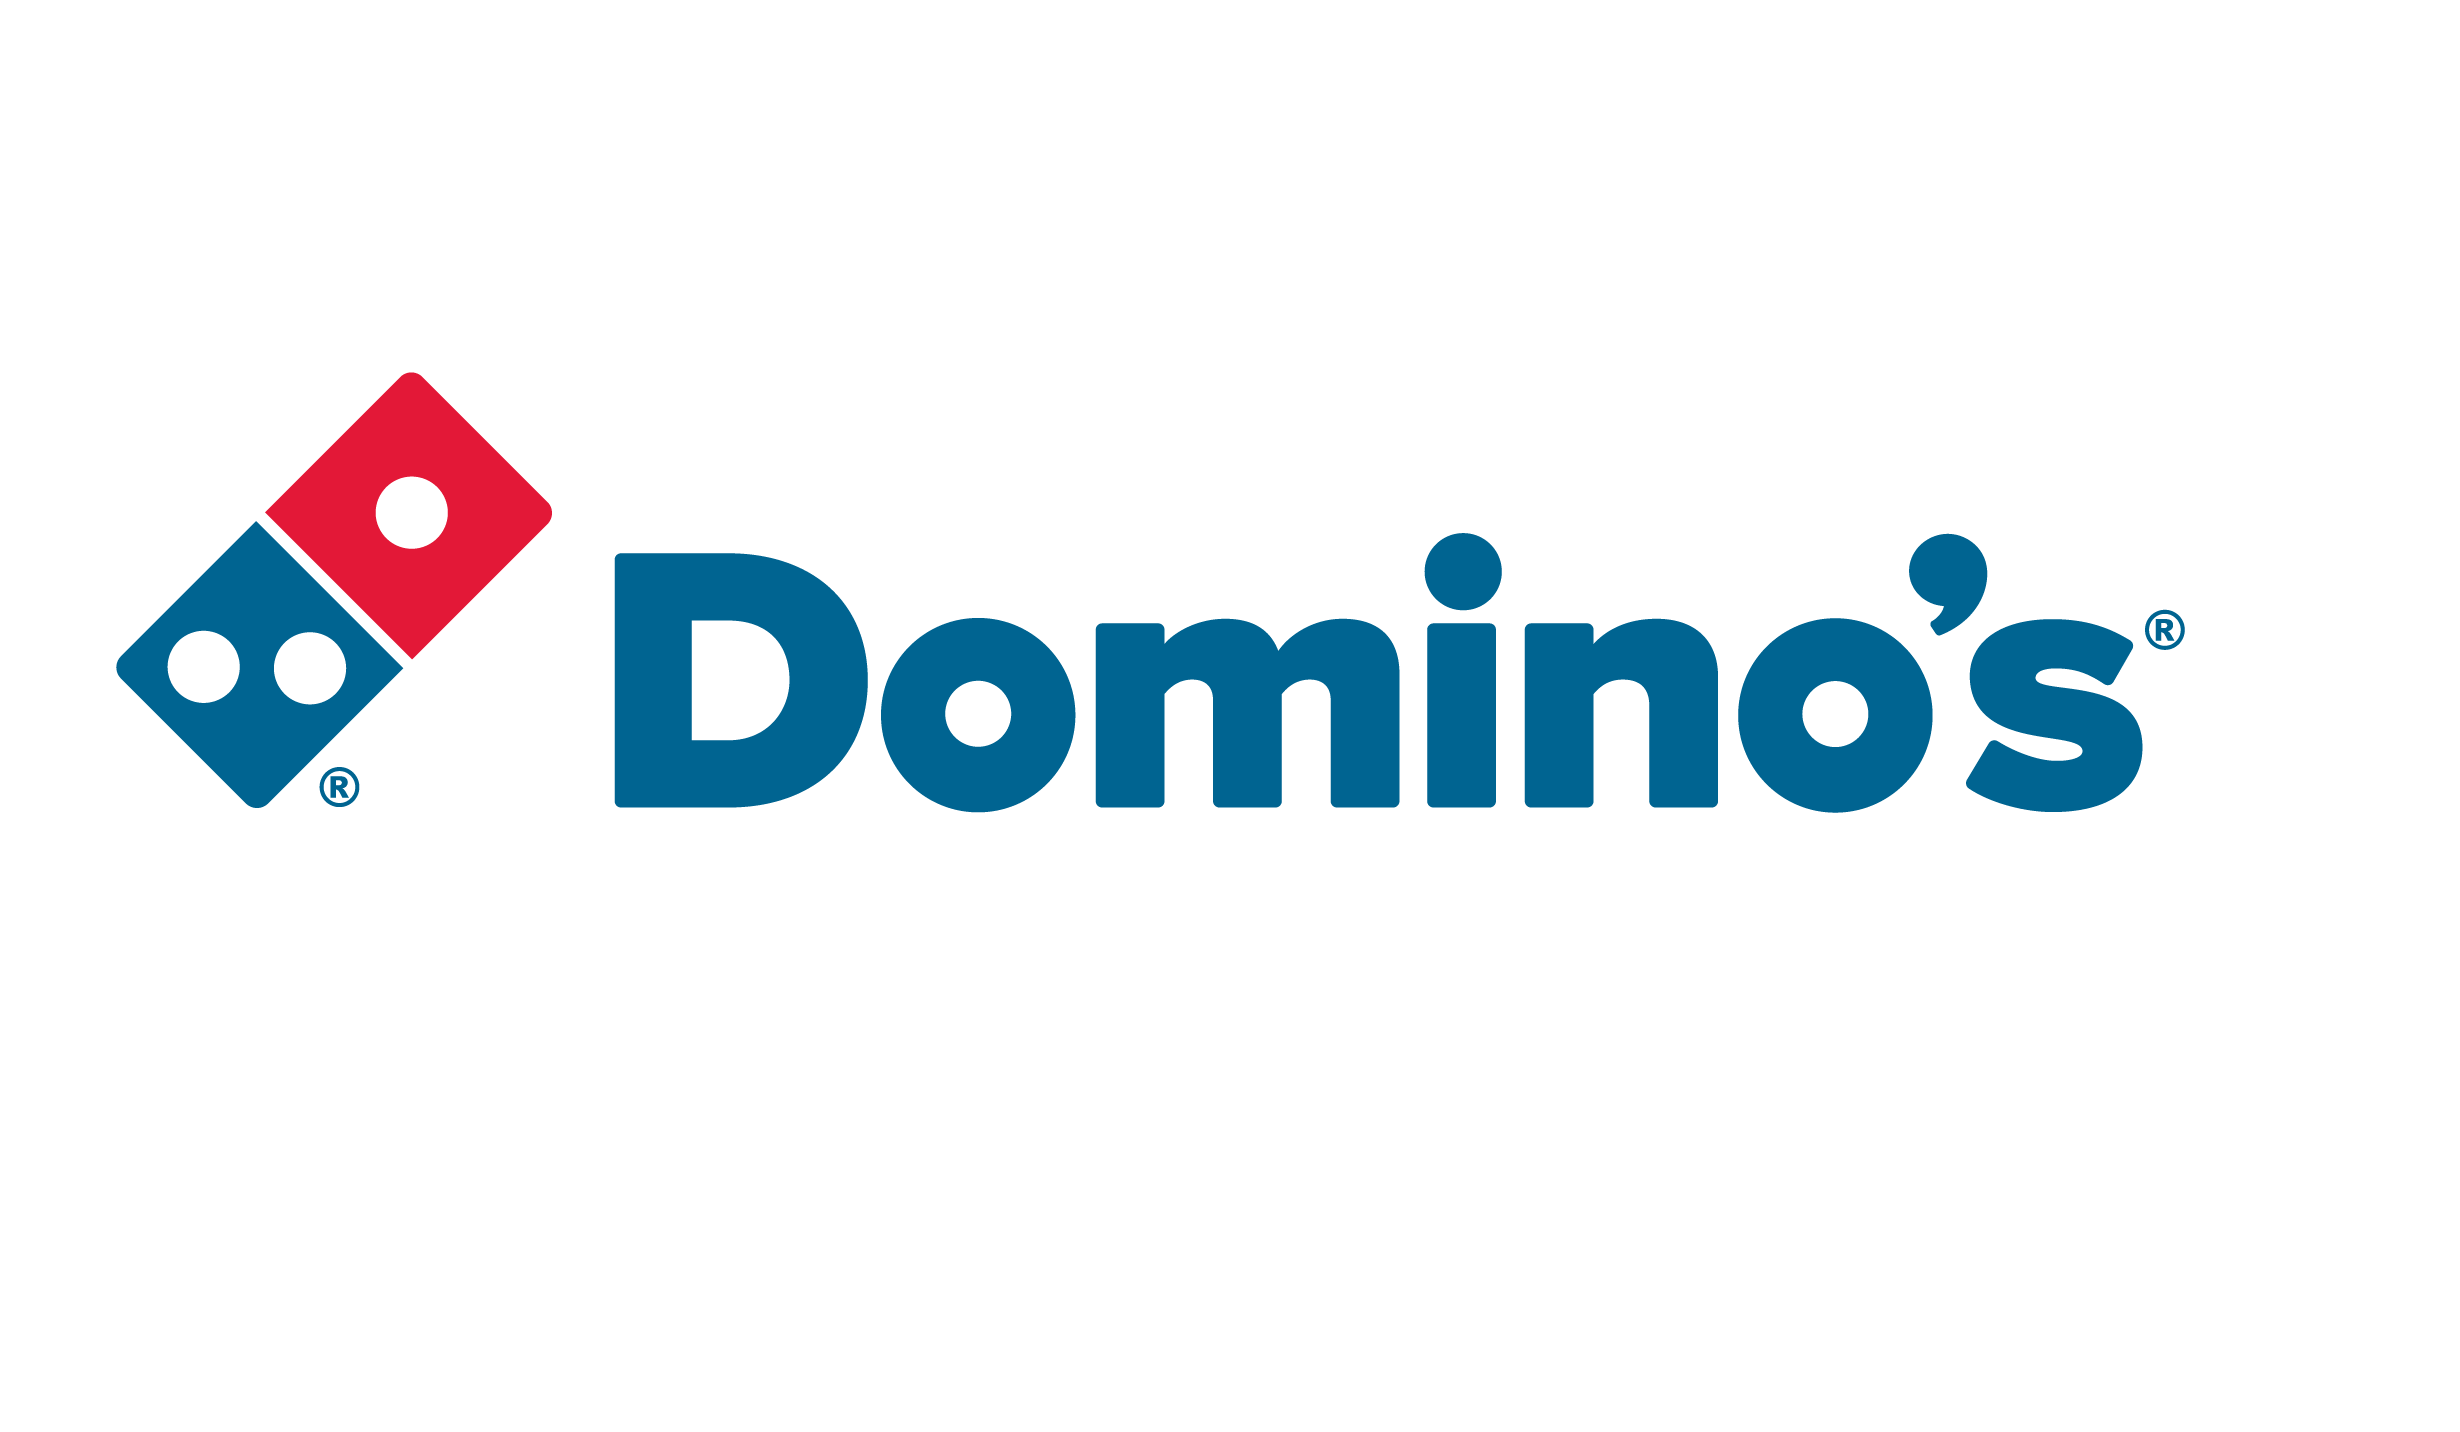 Domino S Pizza Uk Nutrition Information And Calories Full Menu